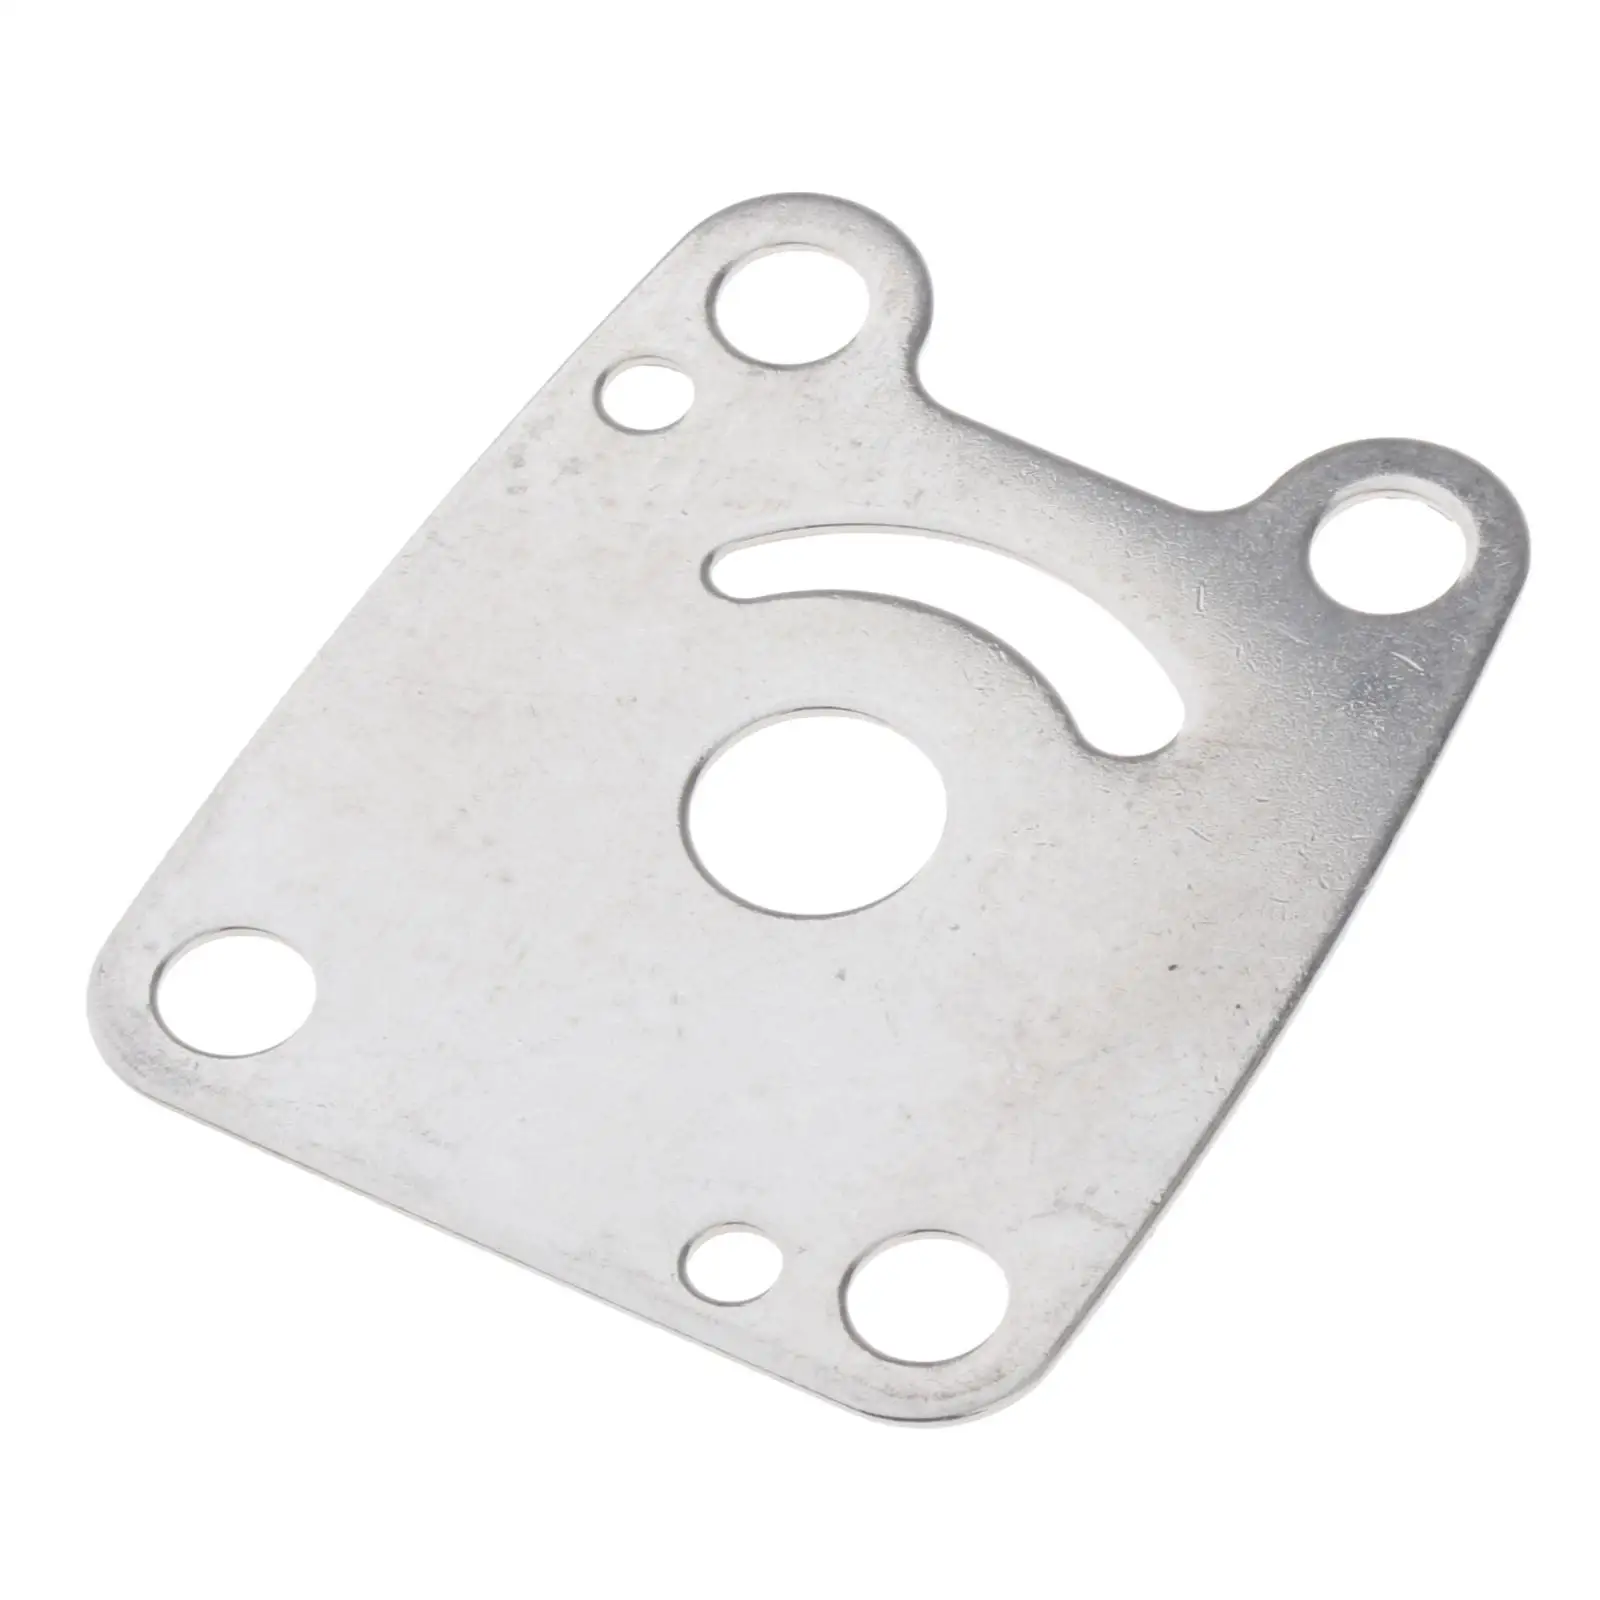 Outboard Water Pump Wear Plate 6E0-44323-00 Replace Impeller Guide Plate for Yamaha 2 4 Stroke 5HP 6HP Outboard Motors